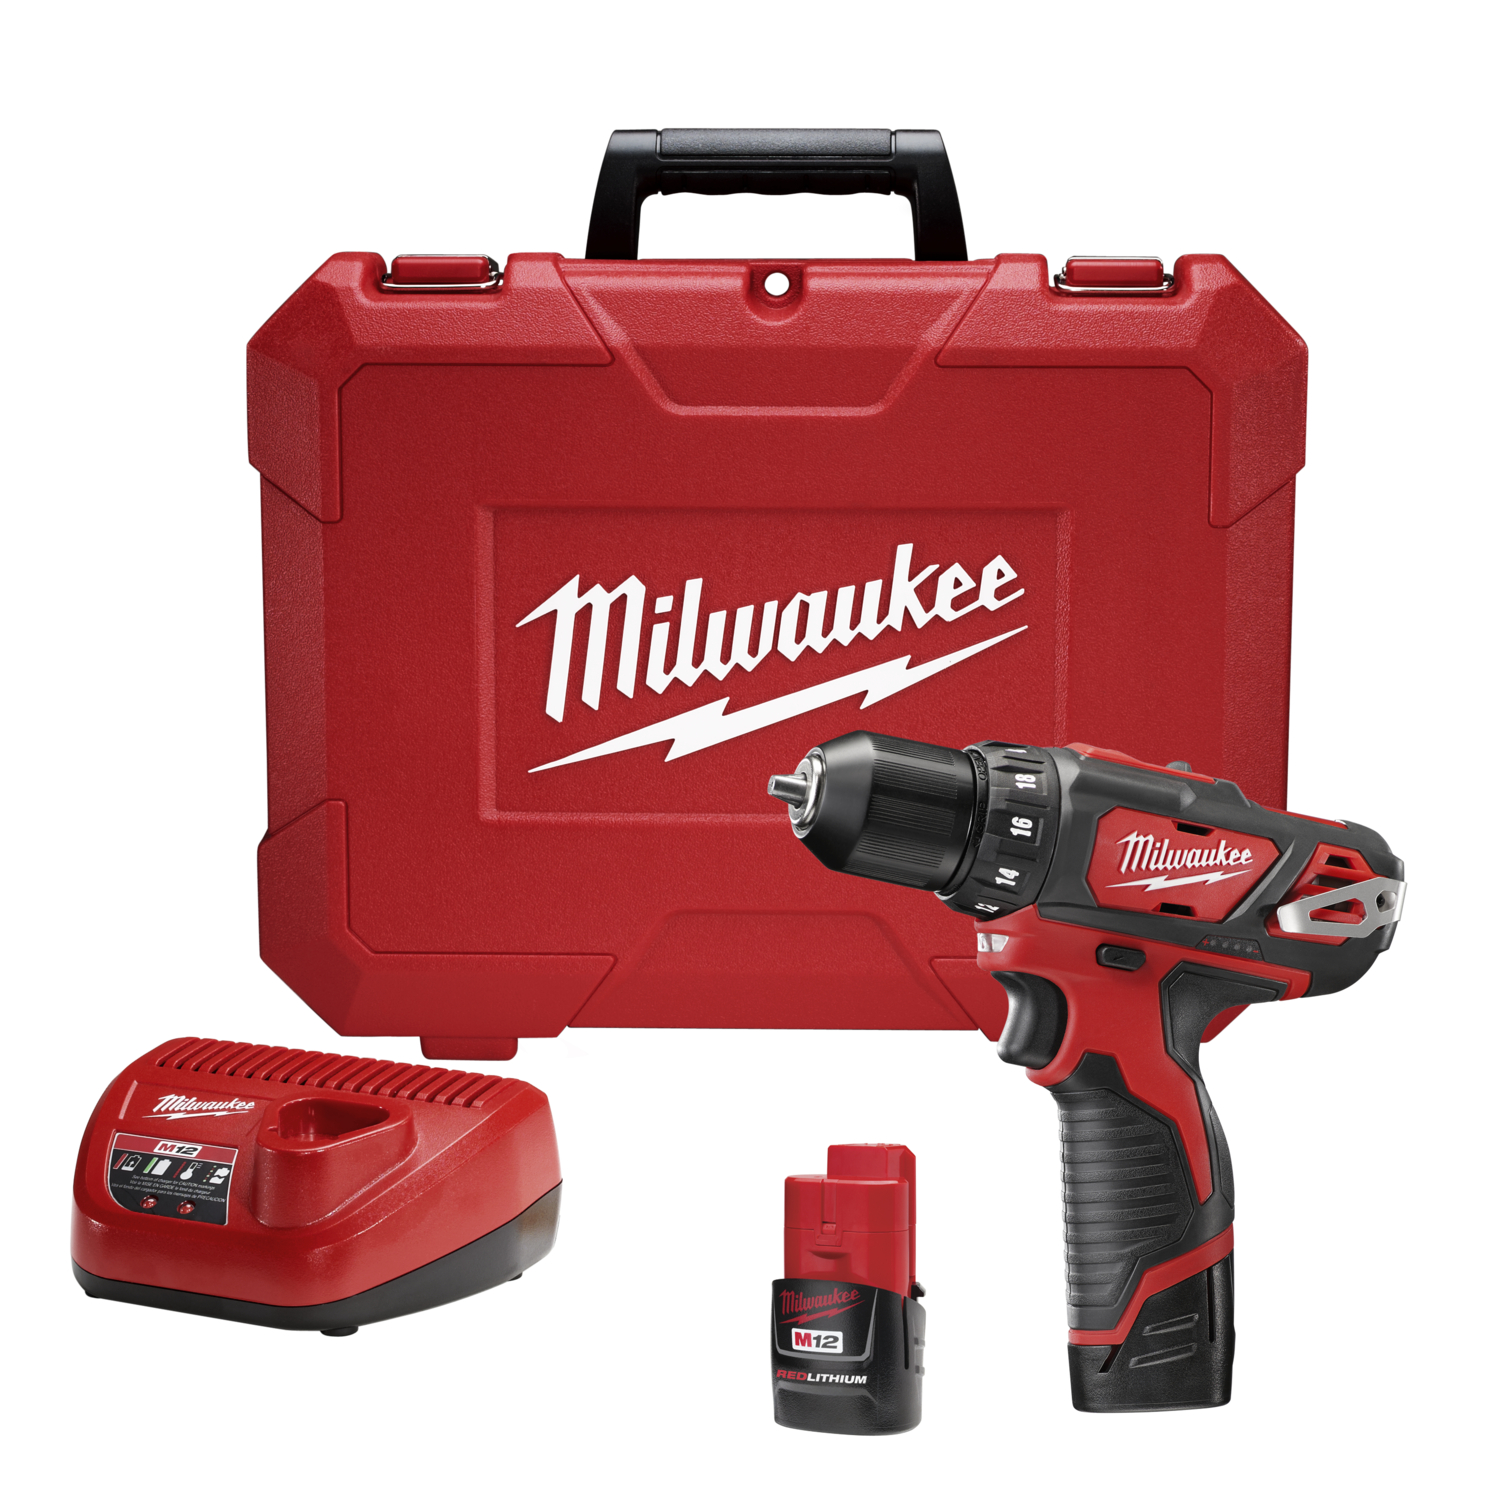 CORDLESS TOOLS | Cordless Tools - Lithium Ion Battery System